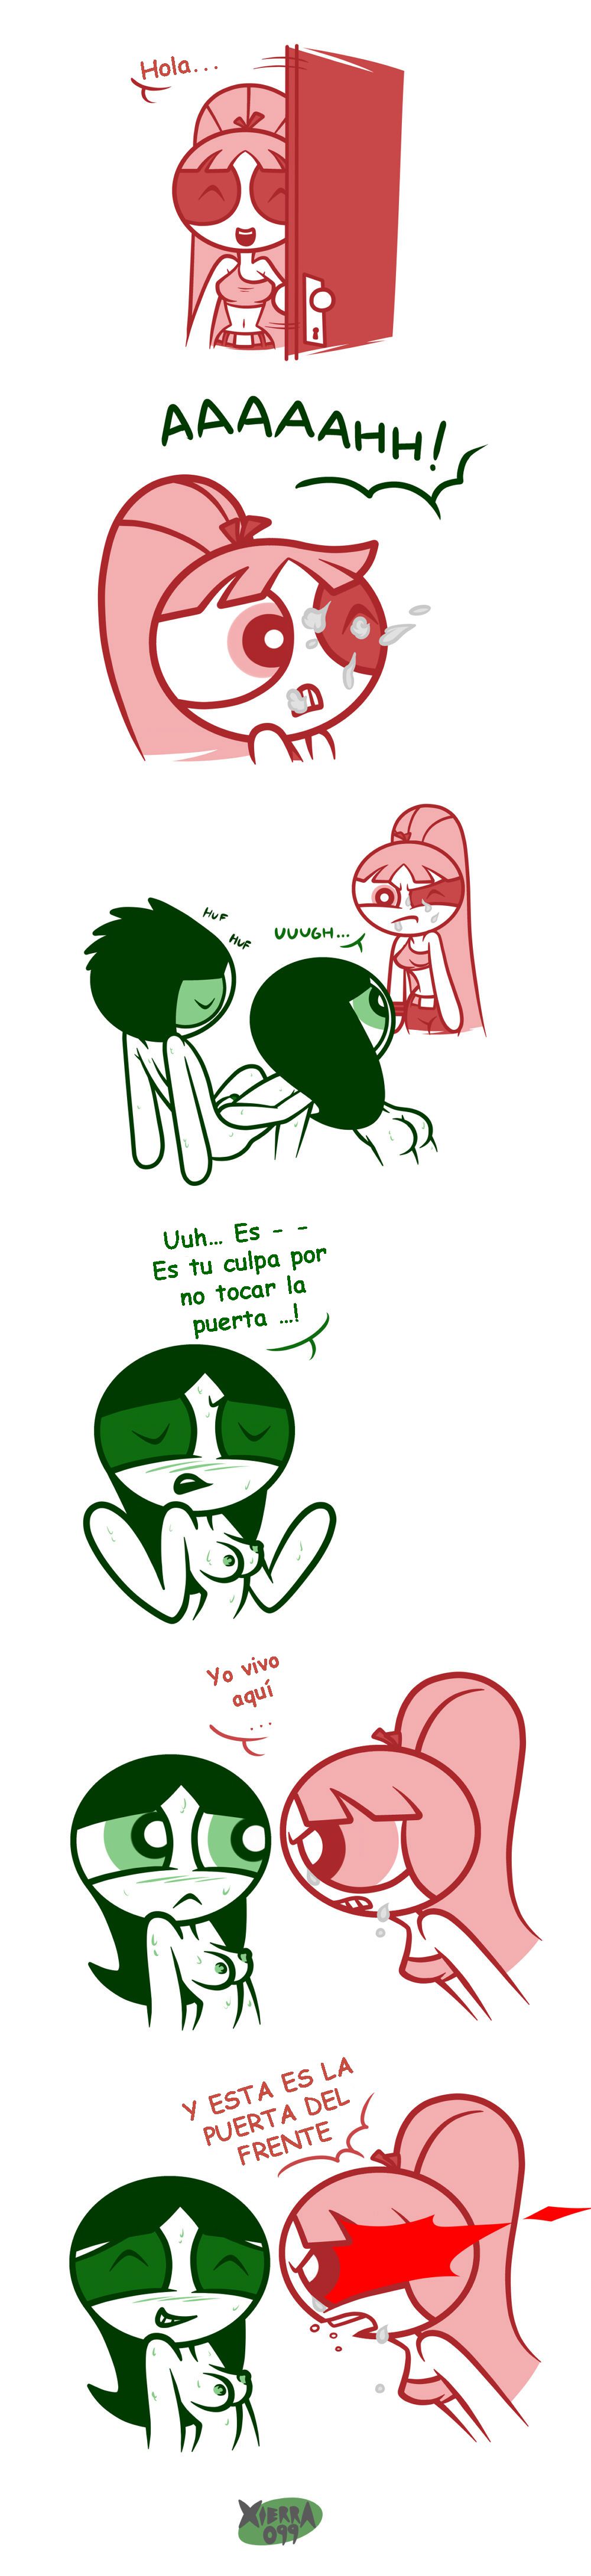 [Xierra099] PPG Strips [Ongoing] Spanish 20